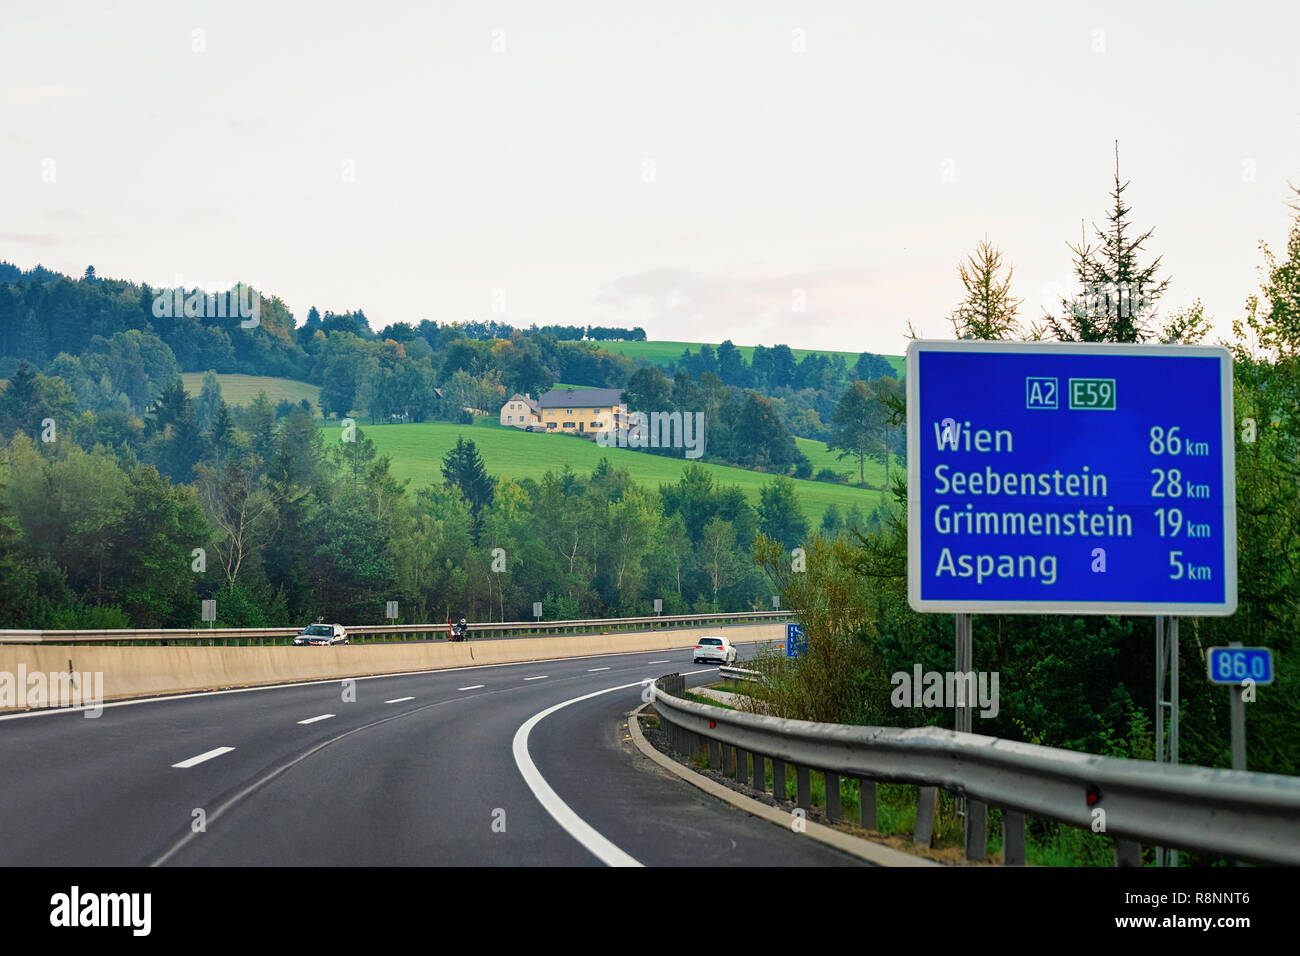 Wien, Austria - September 17, 2018: Sign board in the road of Austria. Julian Alps on the background. Stock Photo